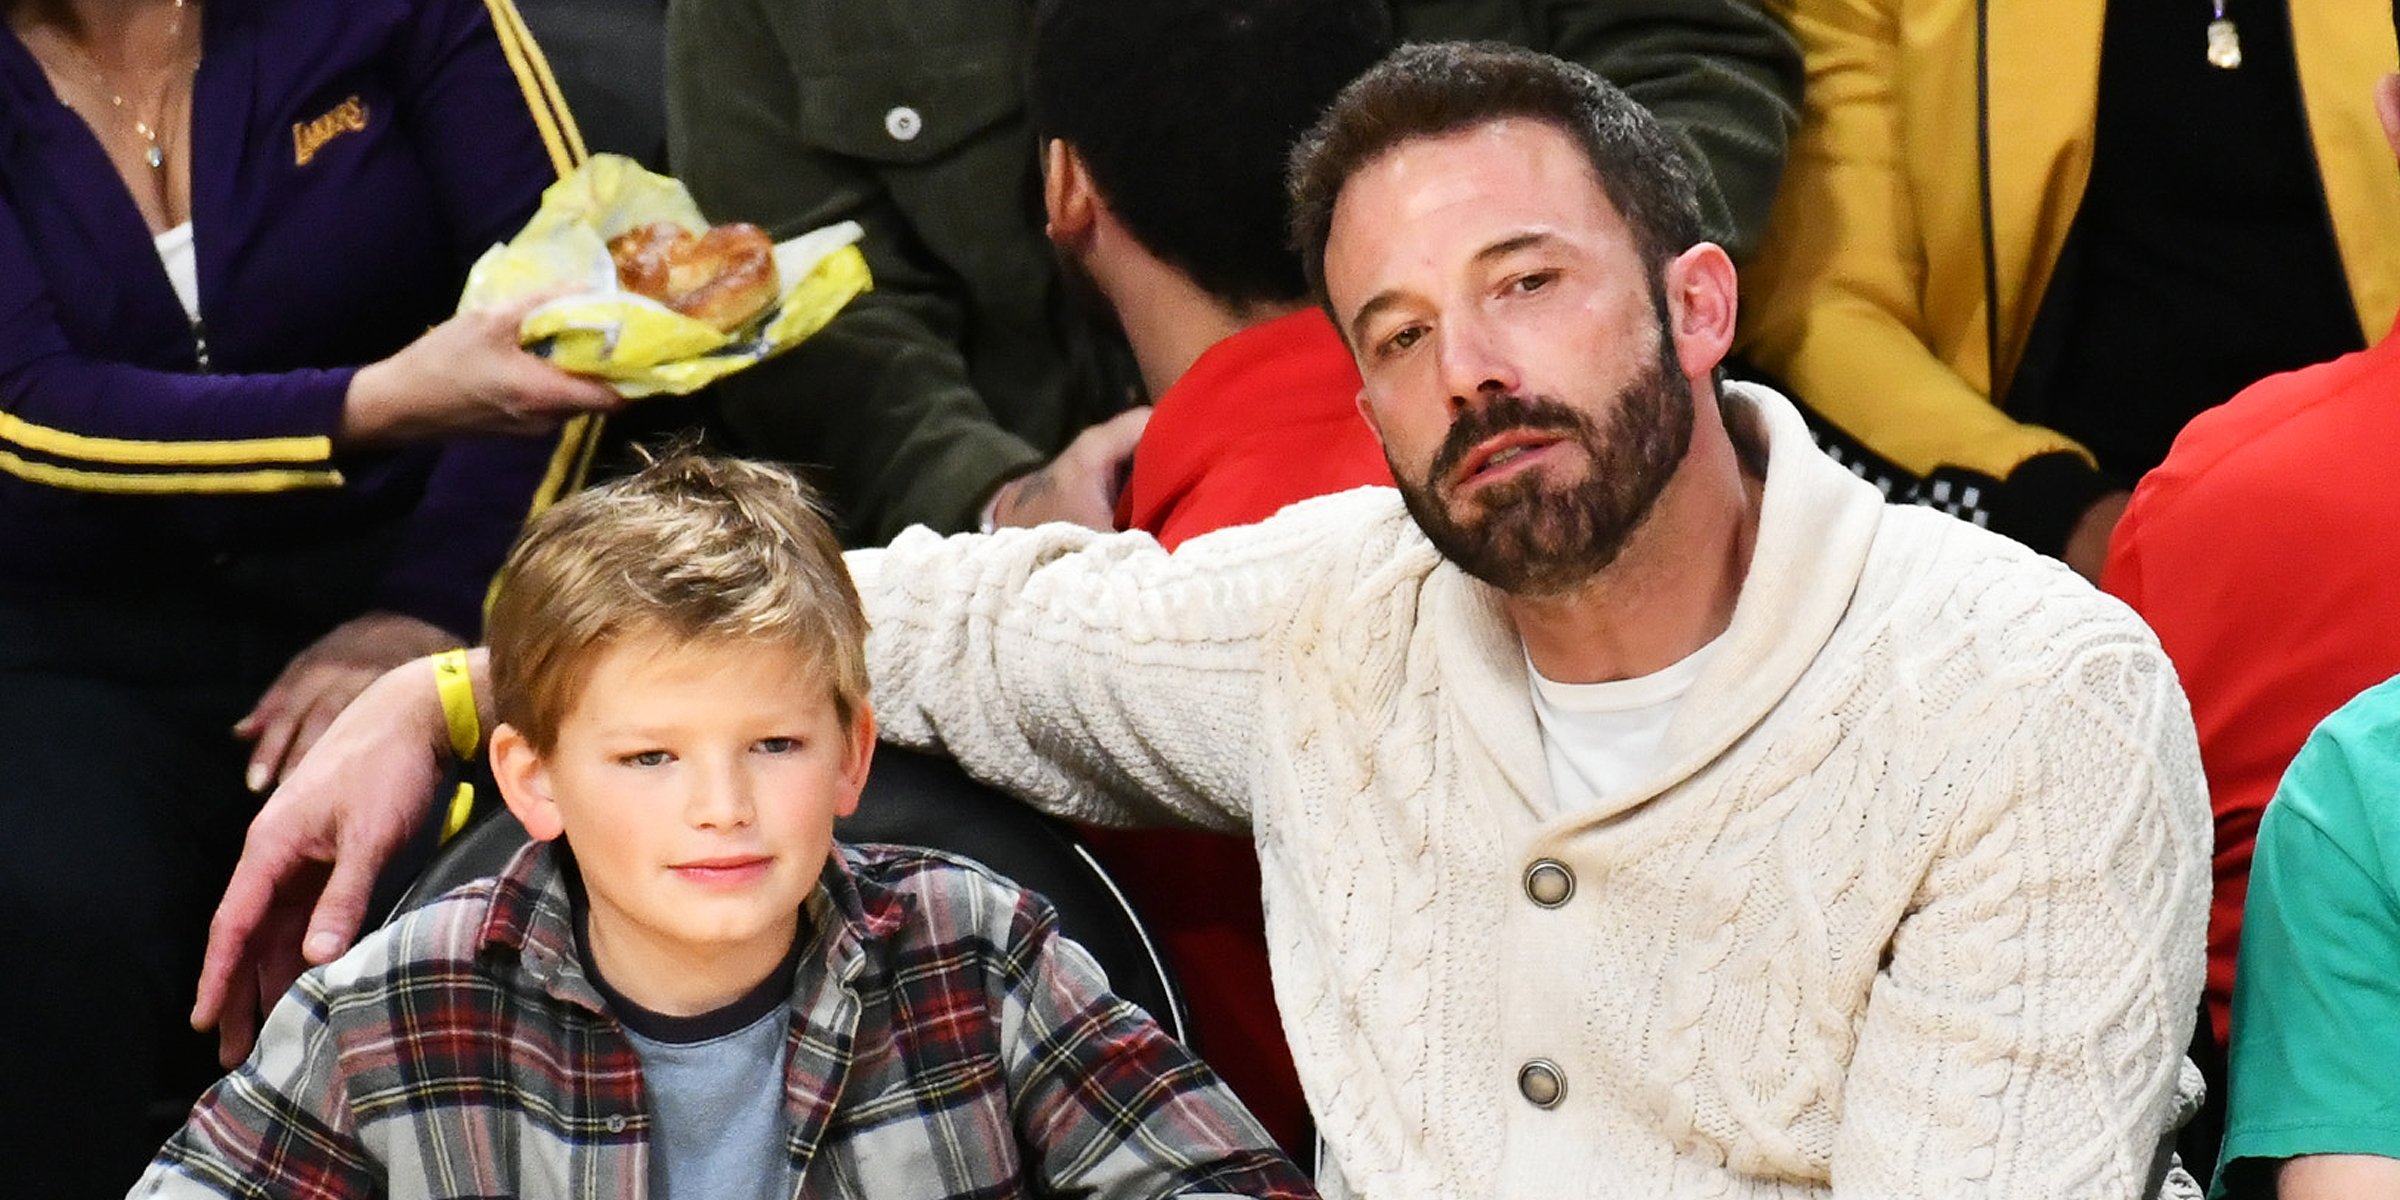 Ben Affleck and his son Samuel Affleck. | Source: Getty Images